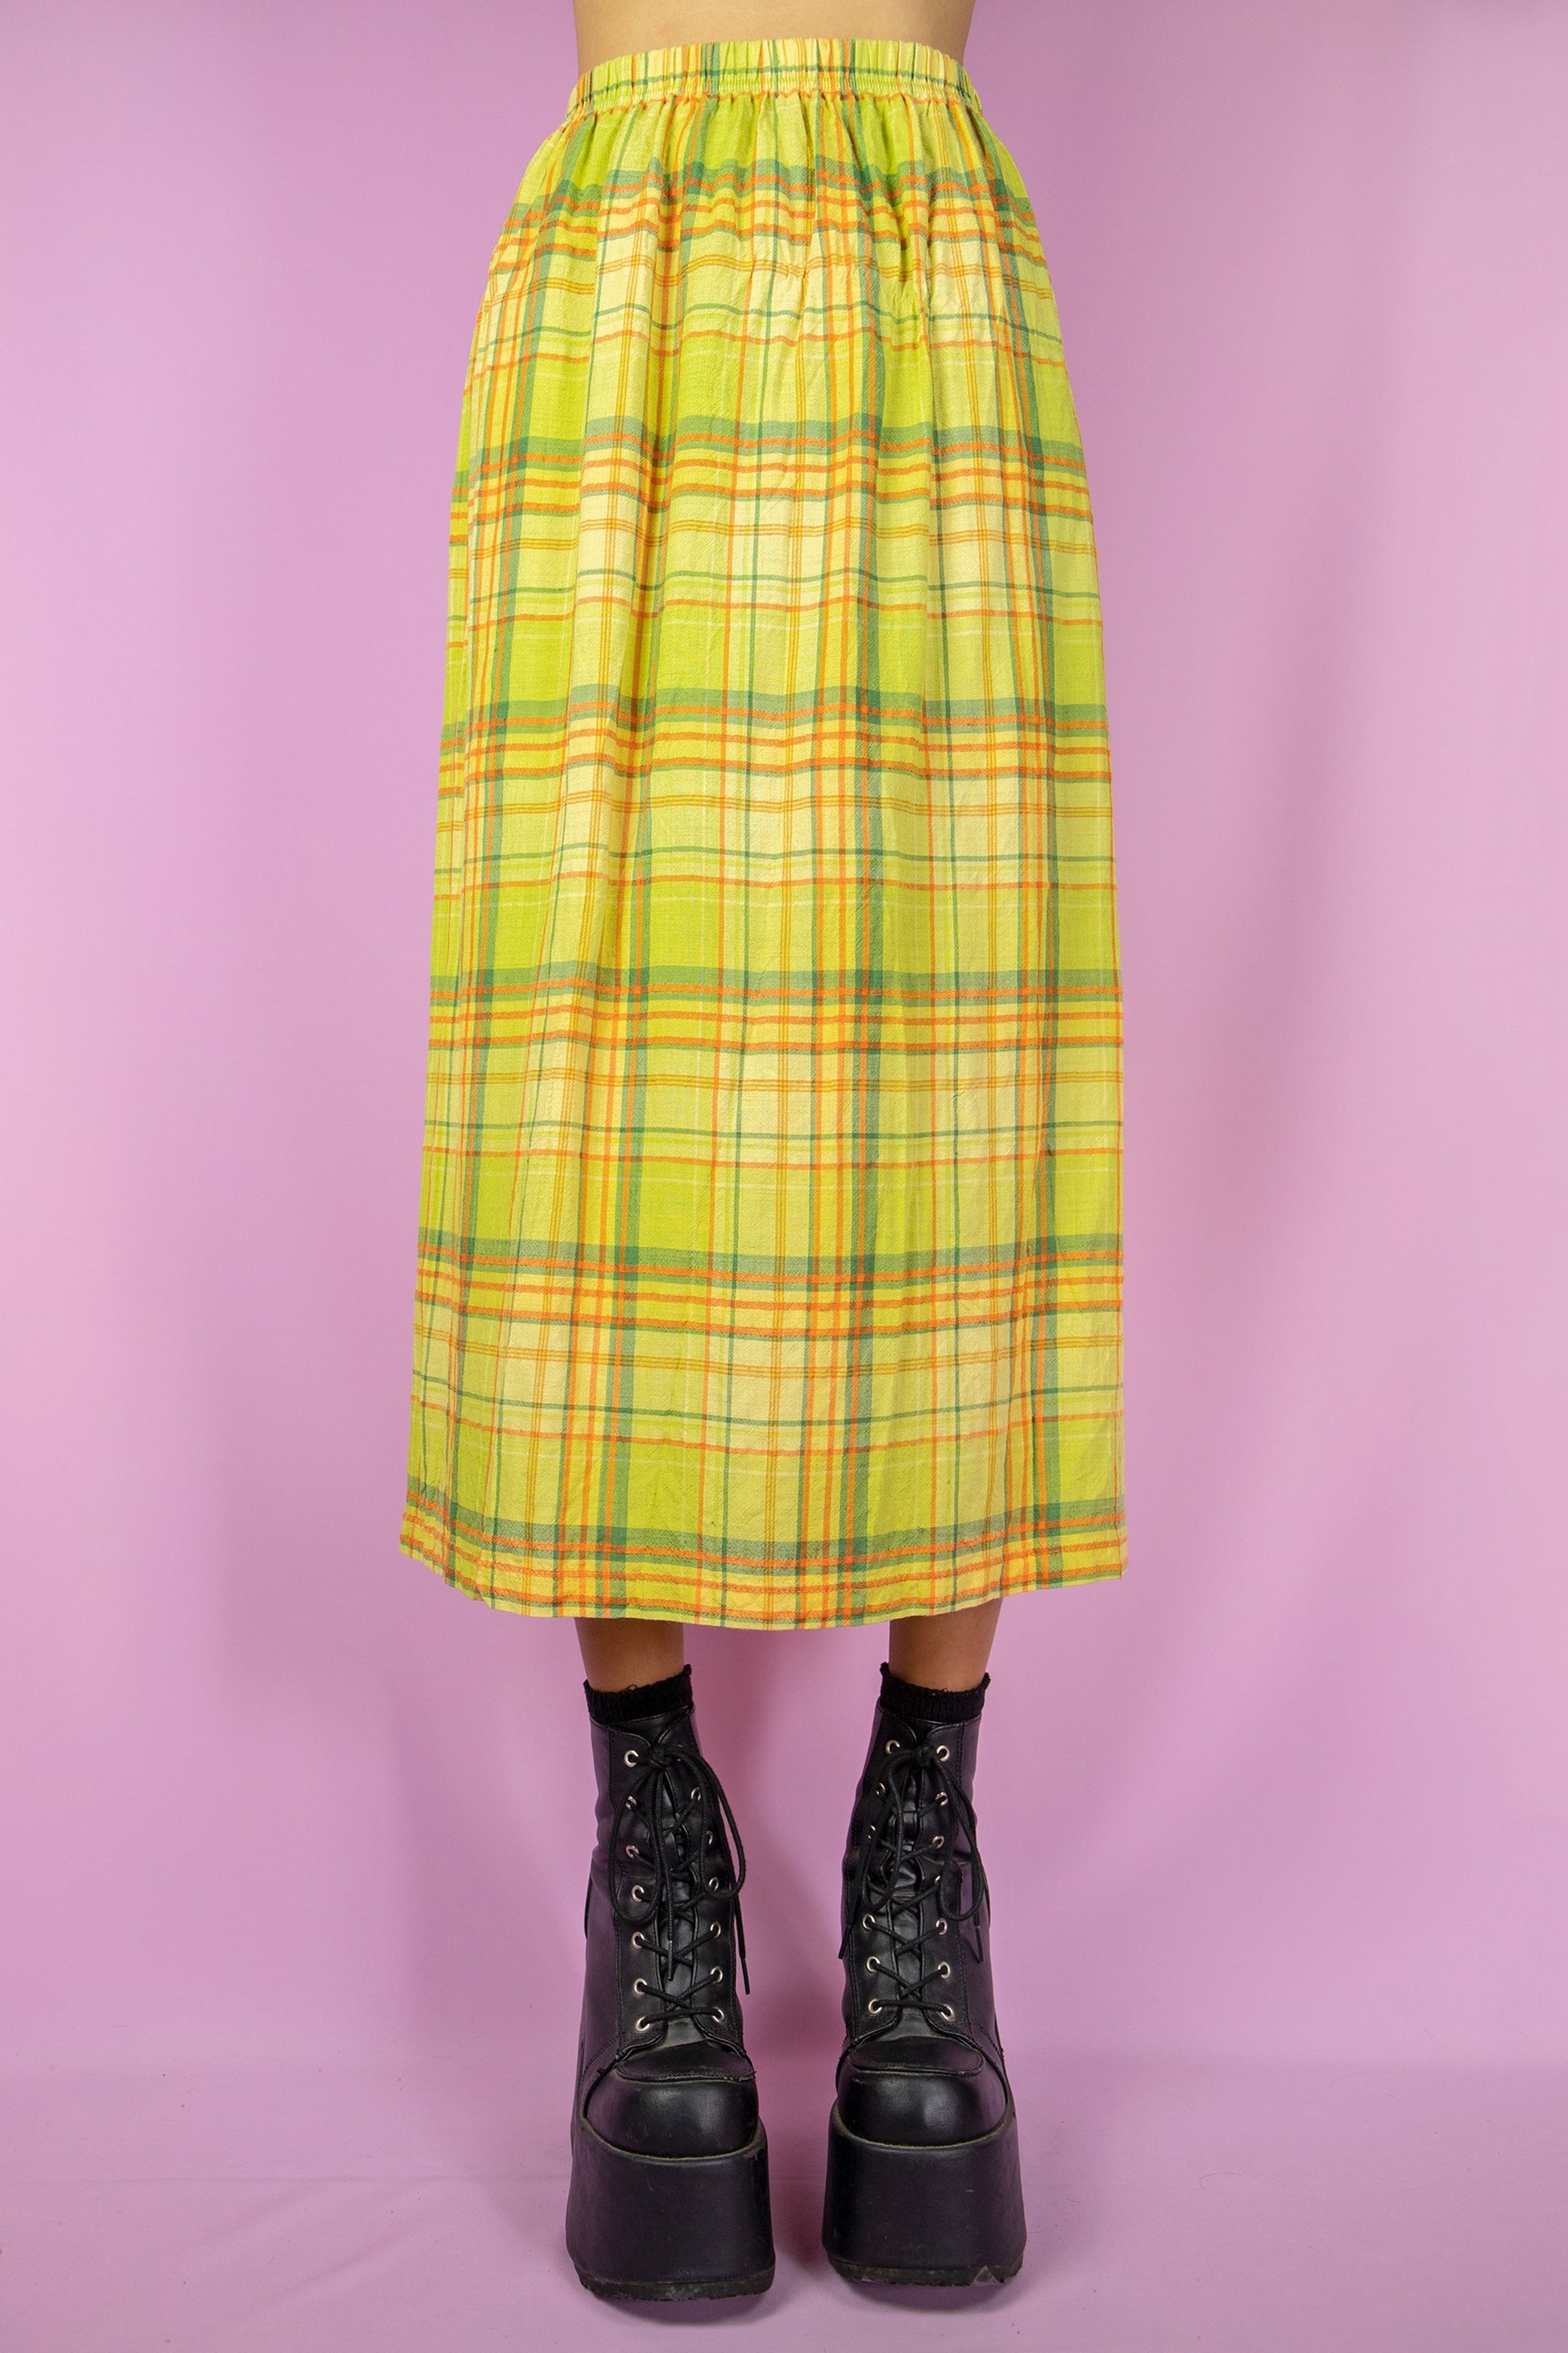 The Vintage 90s Green Plaid Midi Skirt is a long, green, yellow, and orange checkered skirt featuring a side slit and elastic waist. Cottage prairie 1990s boho summer skirt.